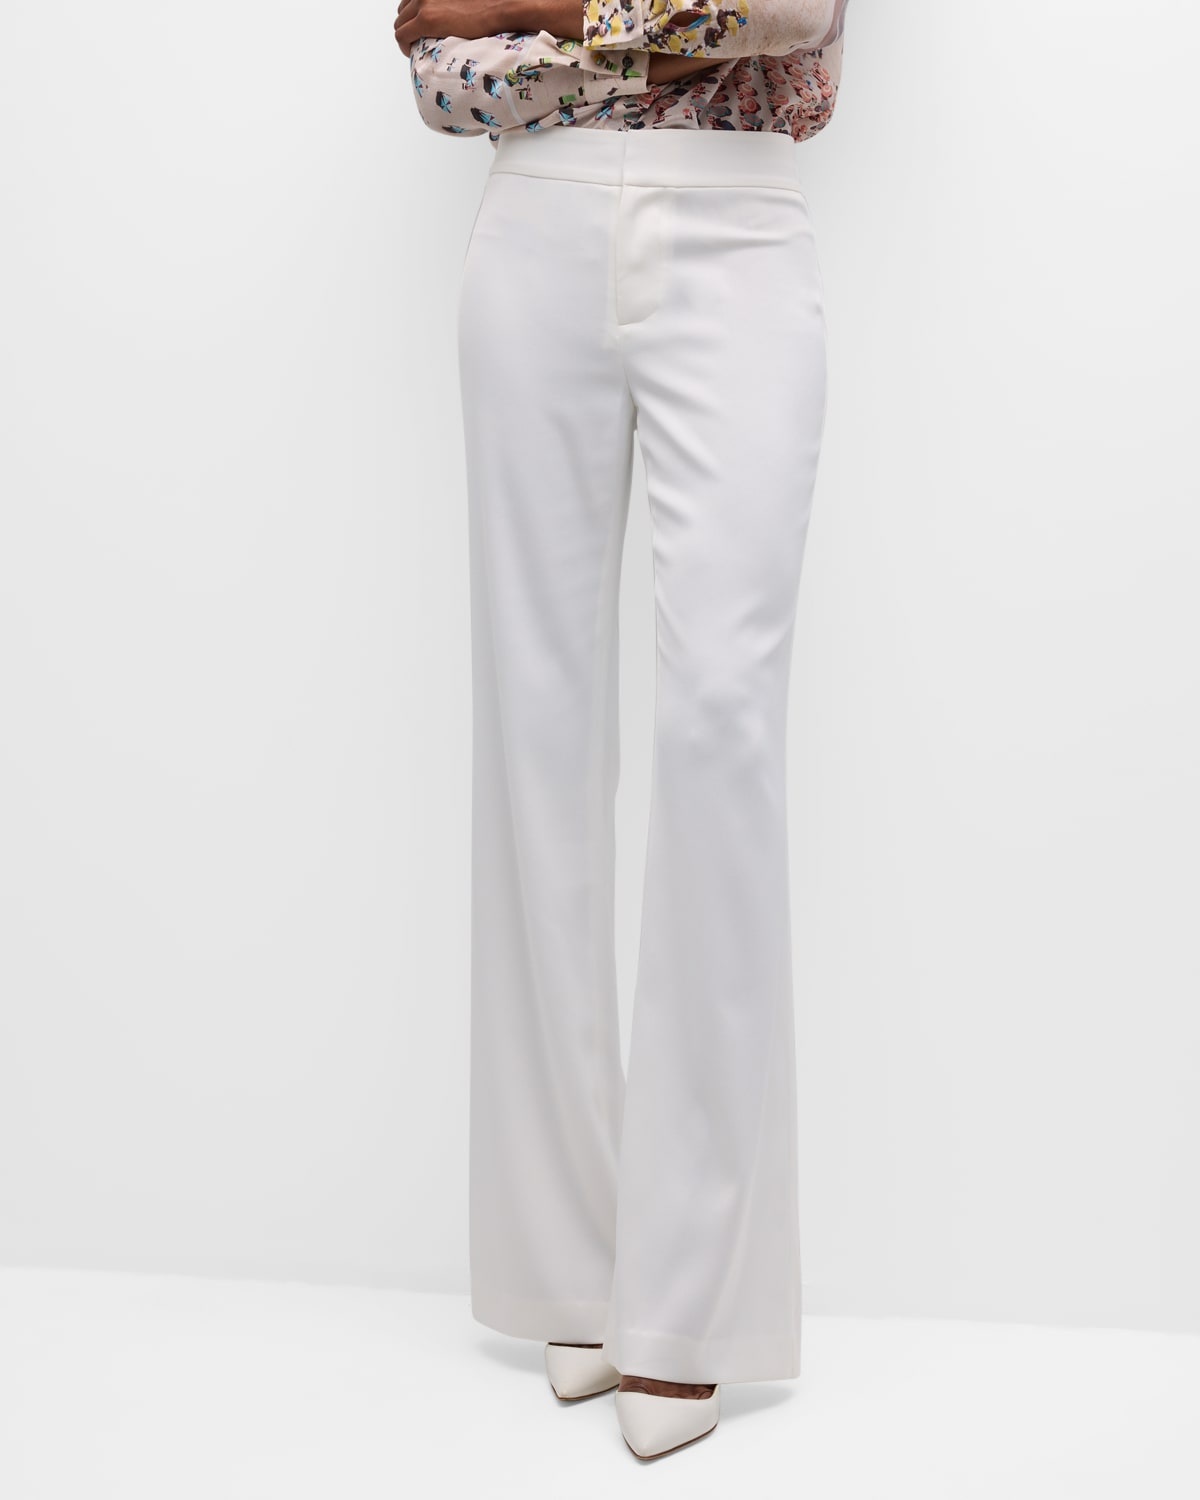 Andrew Mid-Rise Bootcut Pants - 7